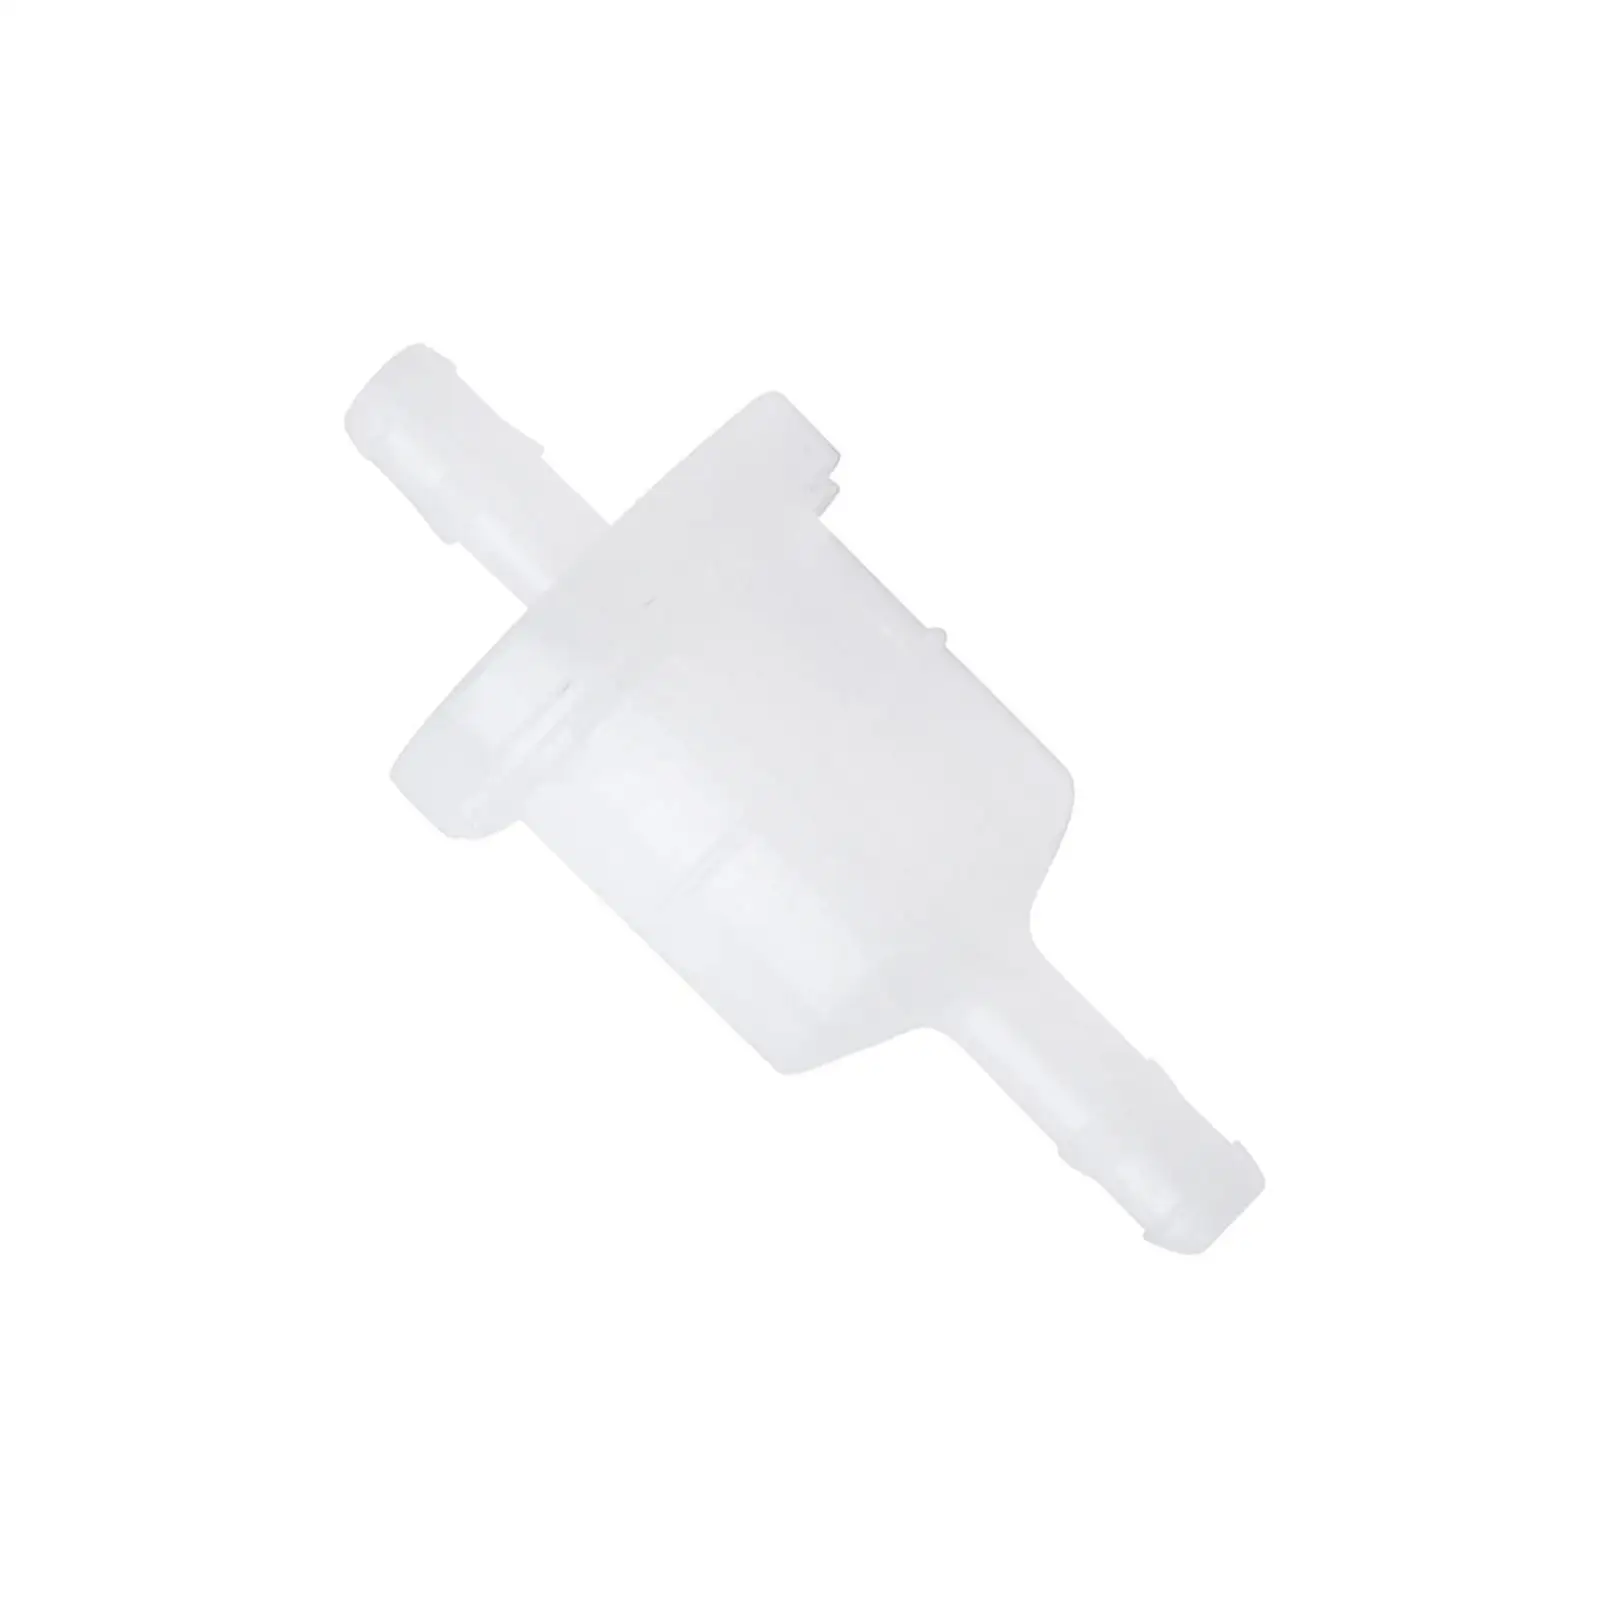 Inline Fuel Filter 369-02230-0 Replaces White Durable for Nissan Outboard Vehicle Spare Parts Good performance